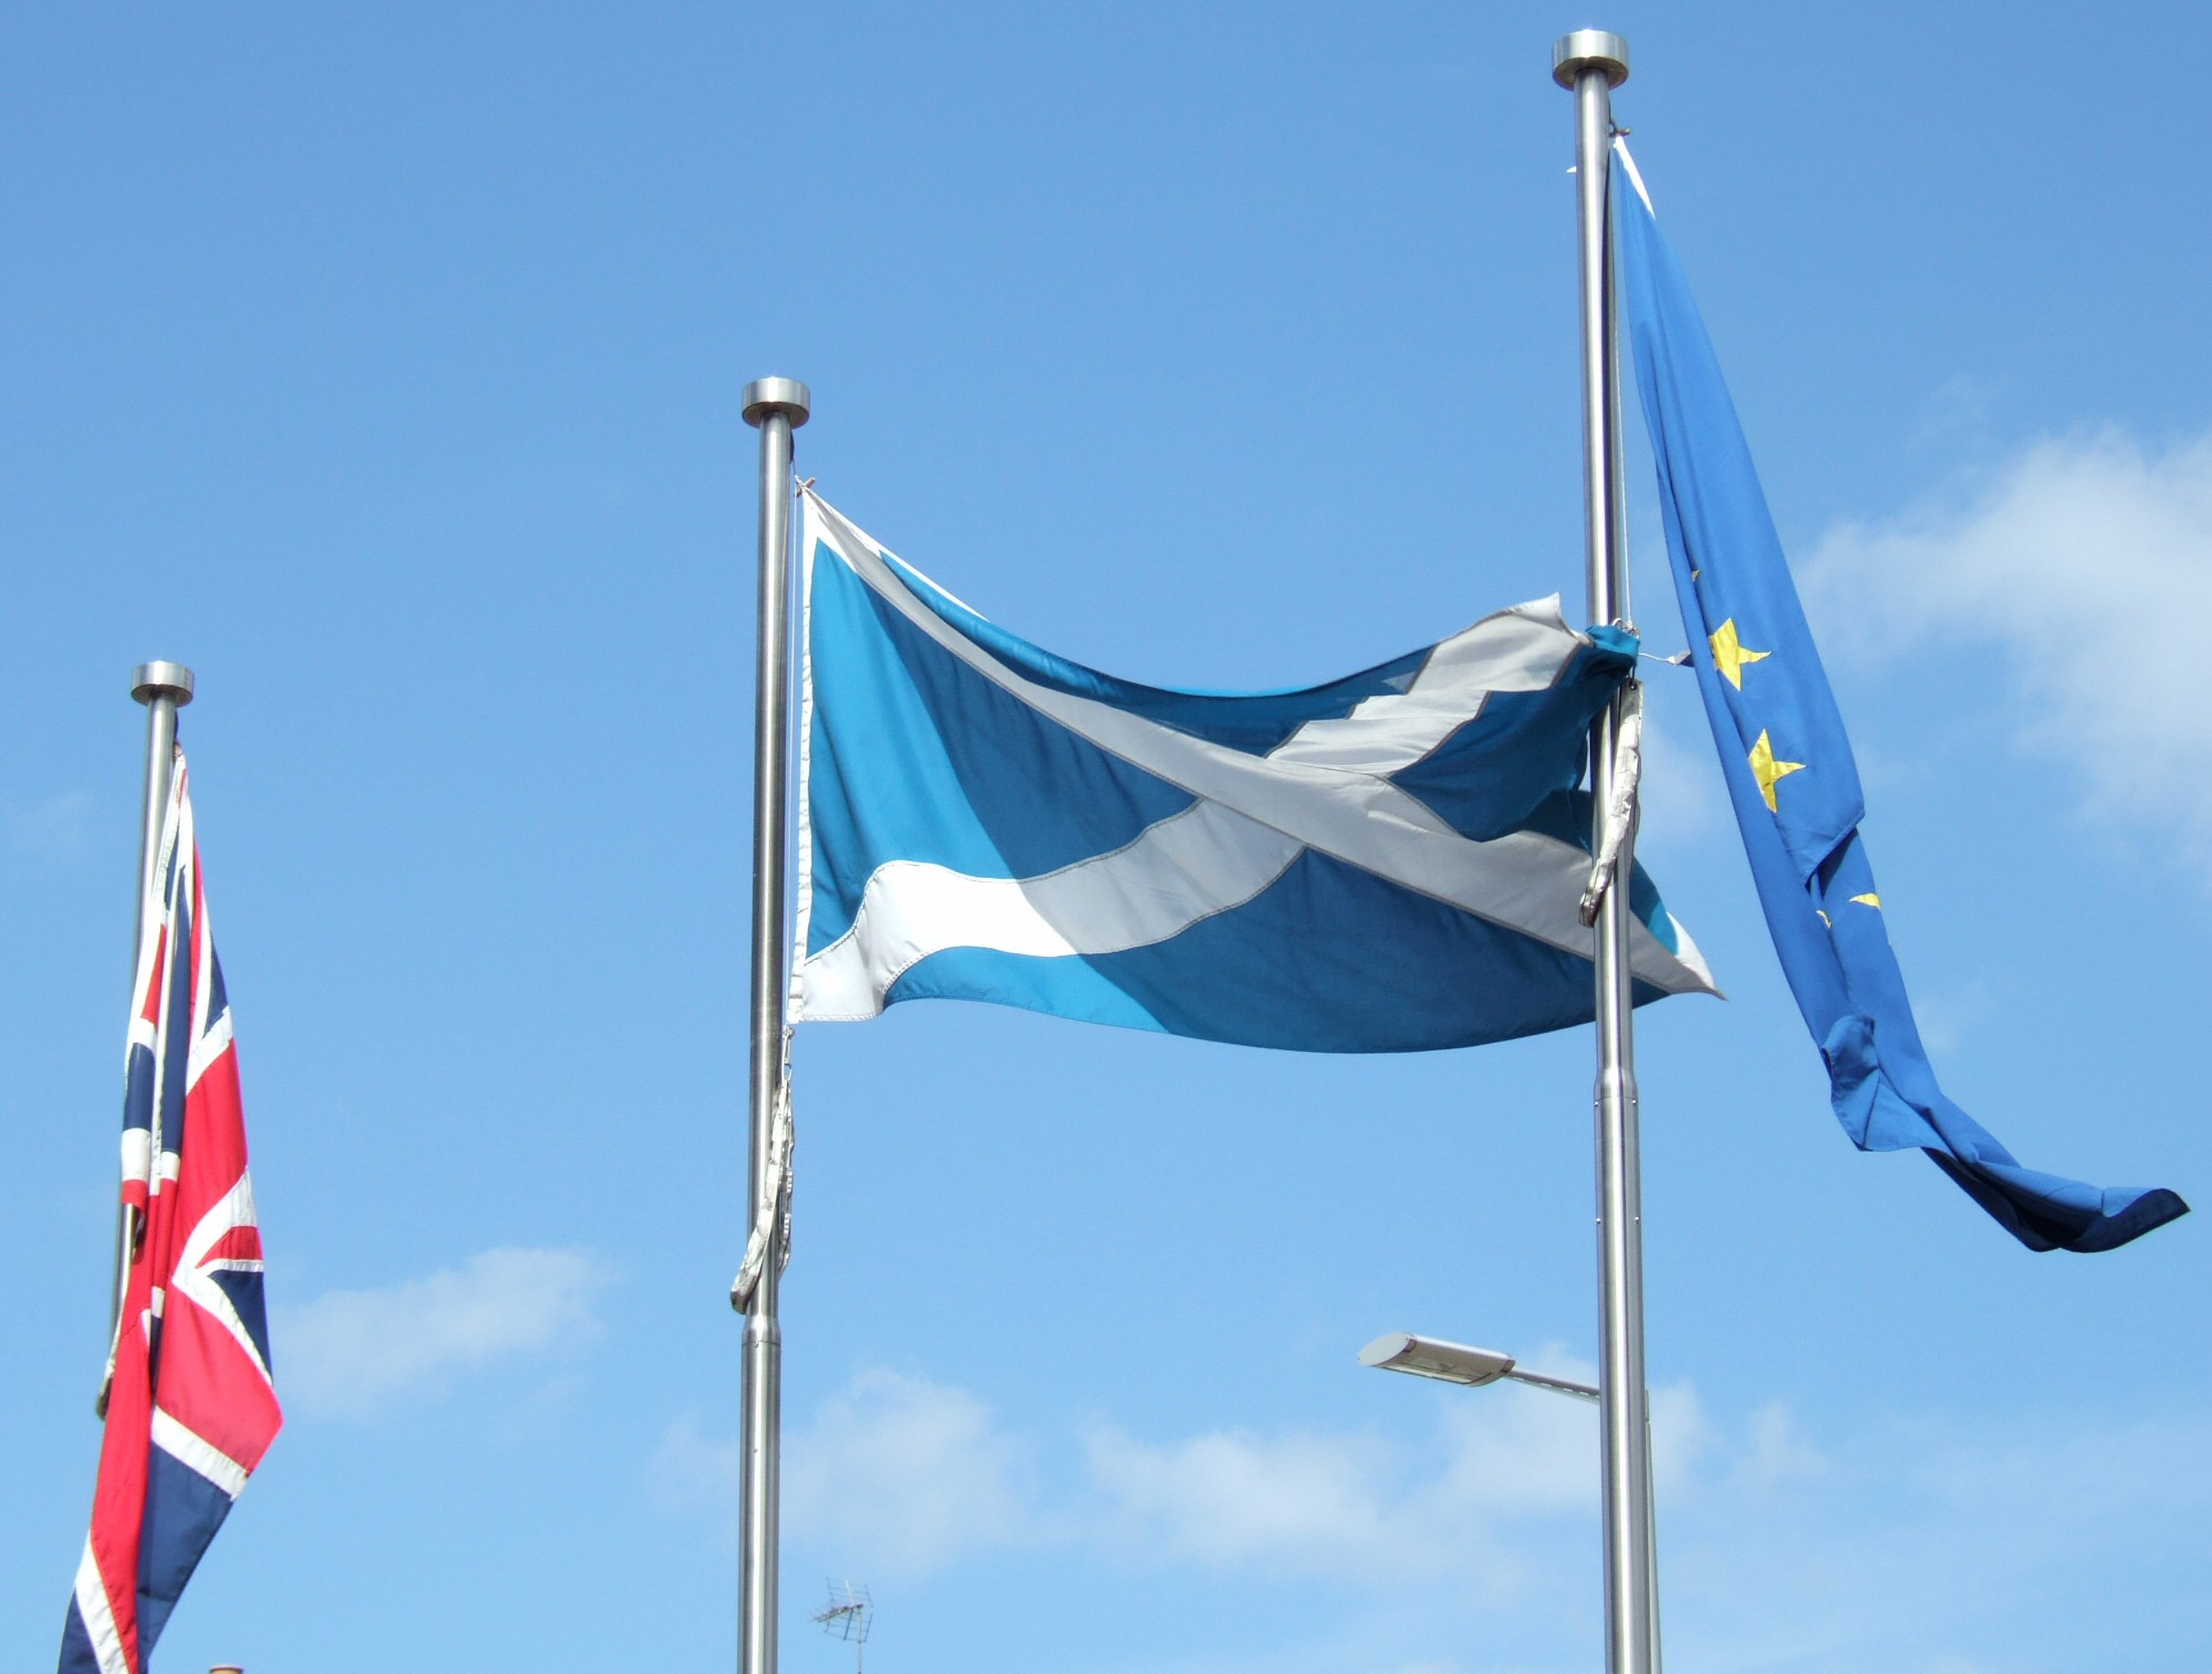 The Scottish flag between the British and The European Union flags outside the Scottish Parliament in Edinburgh, Scotland. Photo: Taken 13 June 2006 by Calum Hutchinson. (CC BY-SA 2.5).